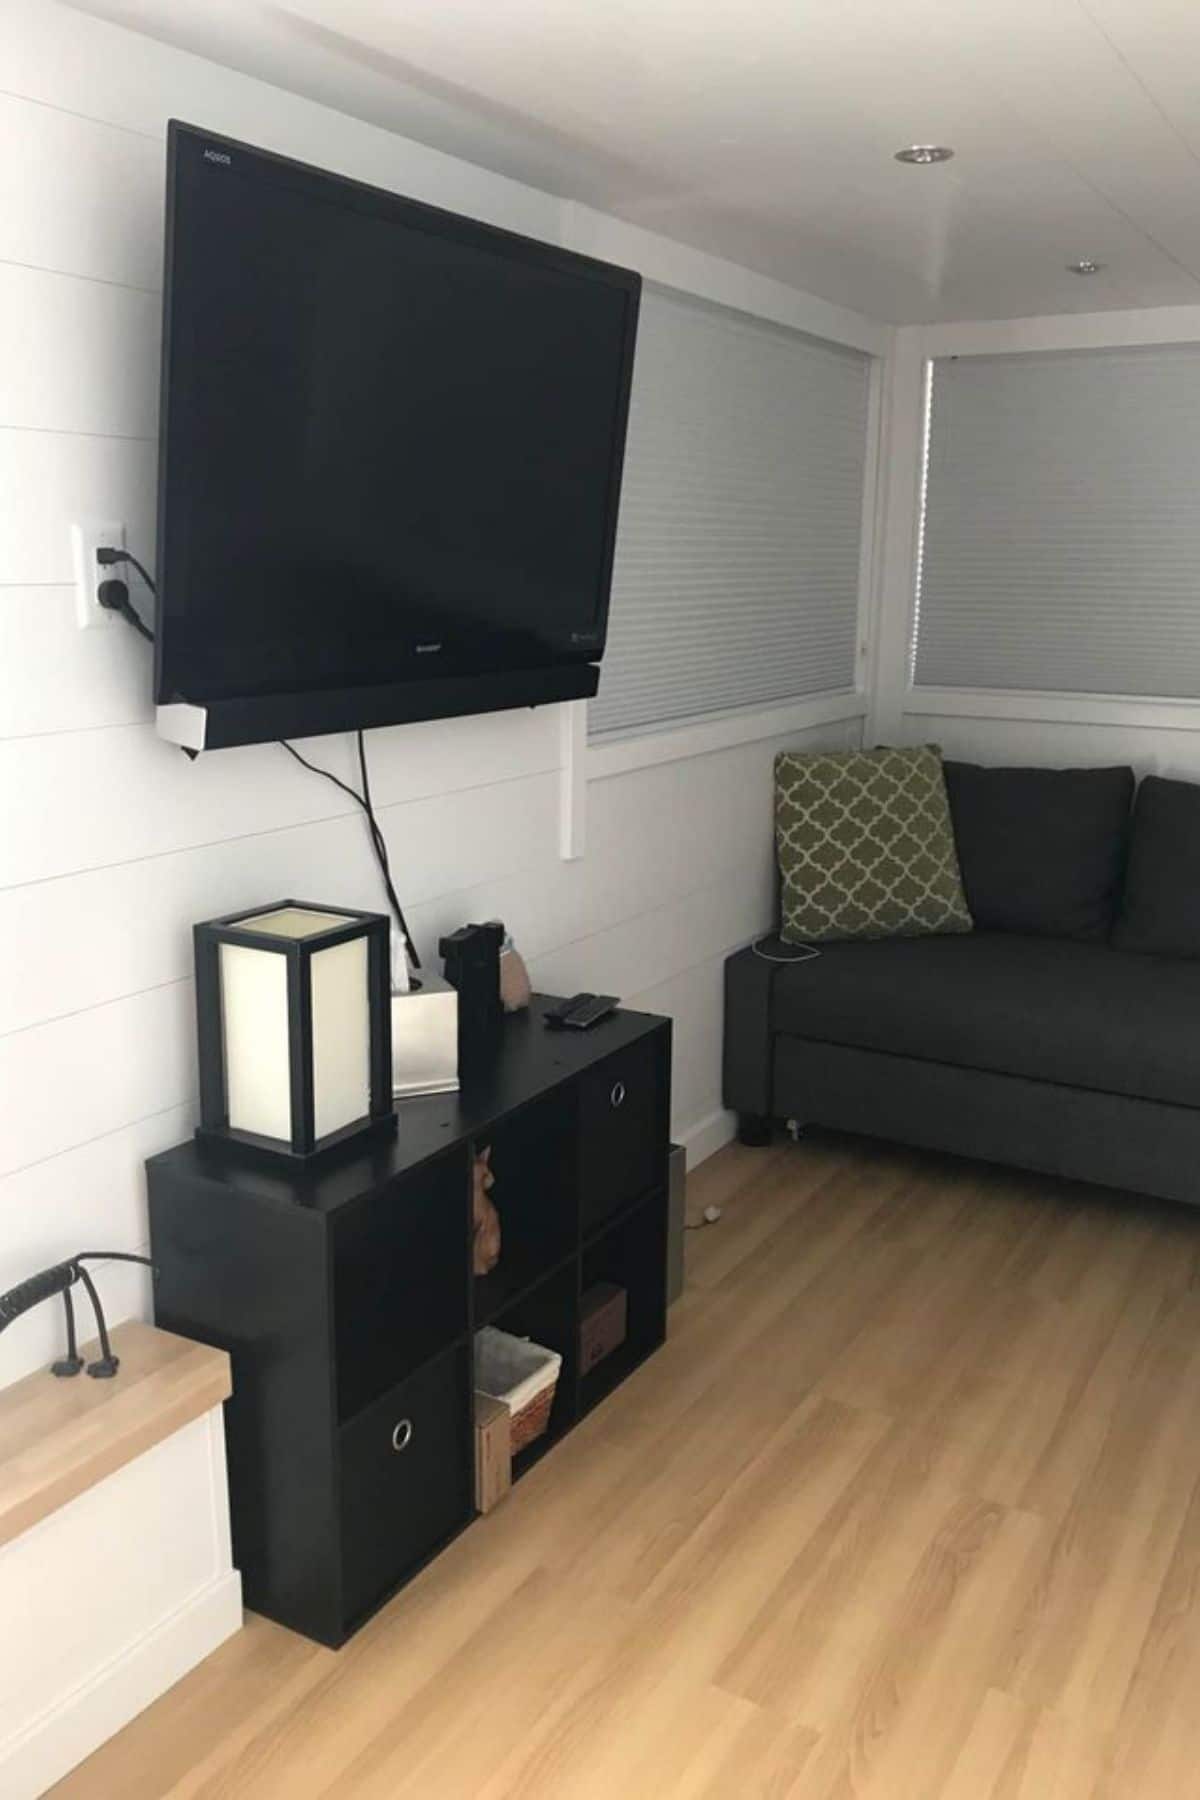 Short black shelves underneath wall mounted television on white wall